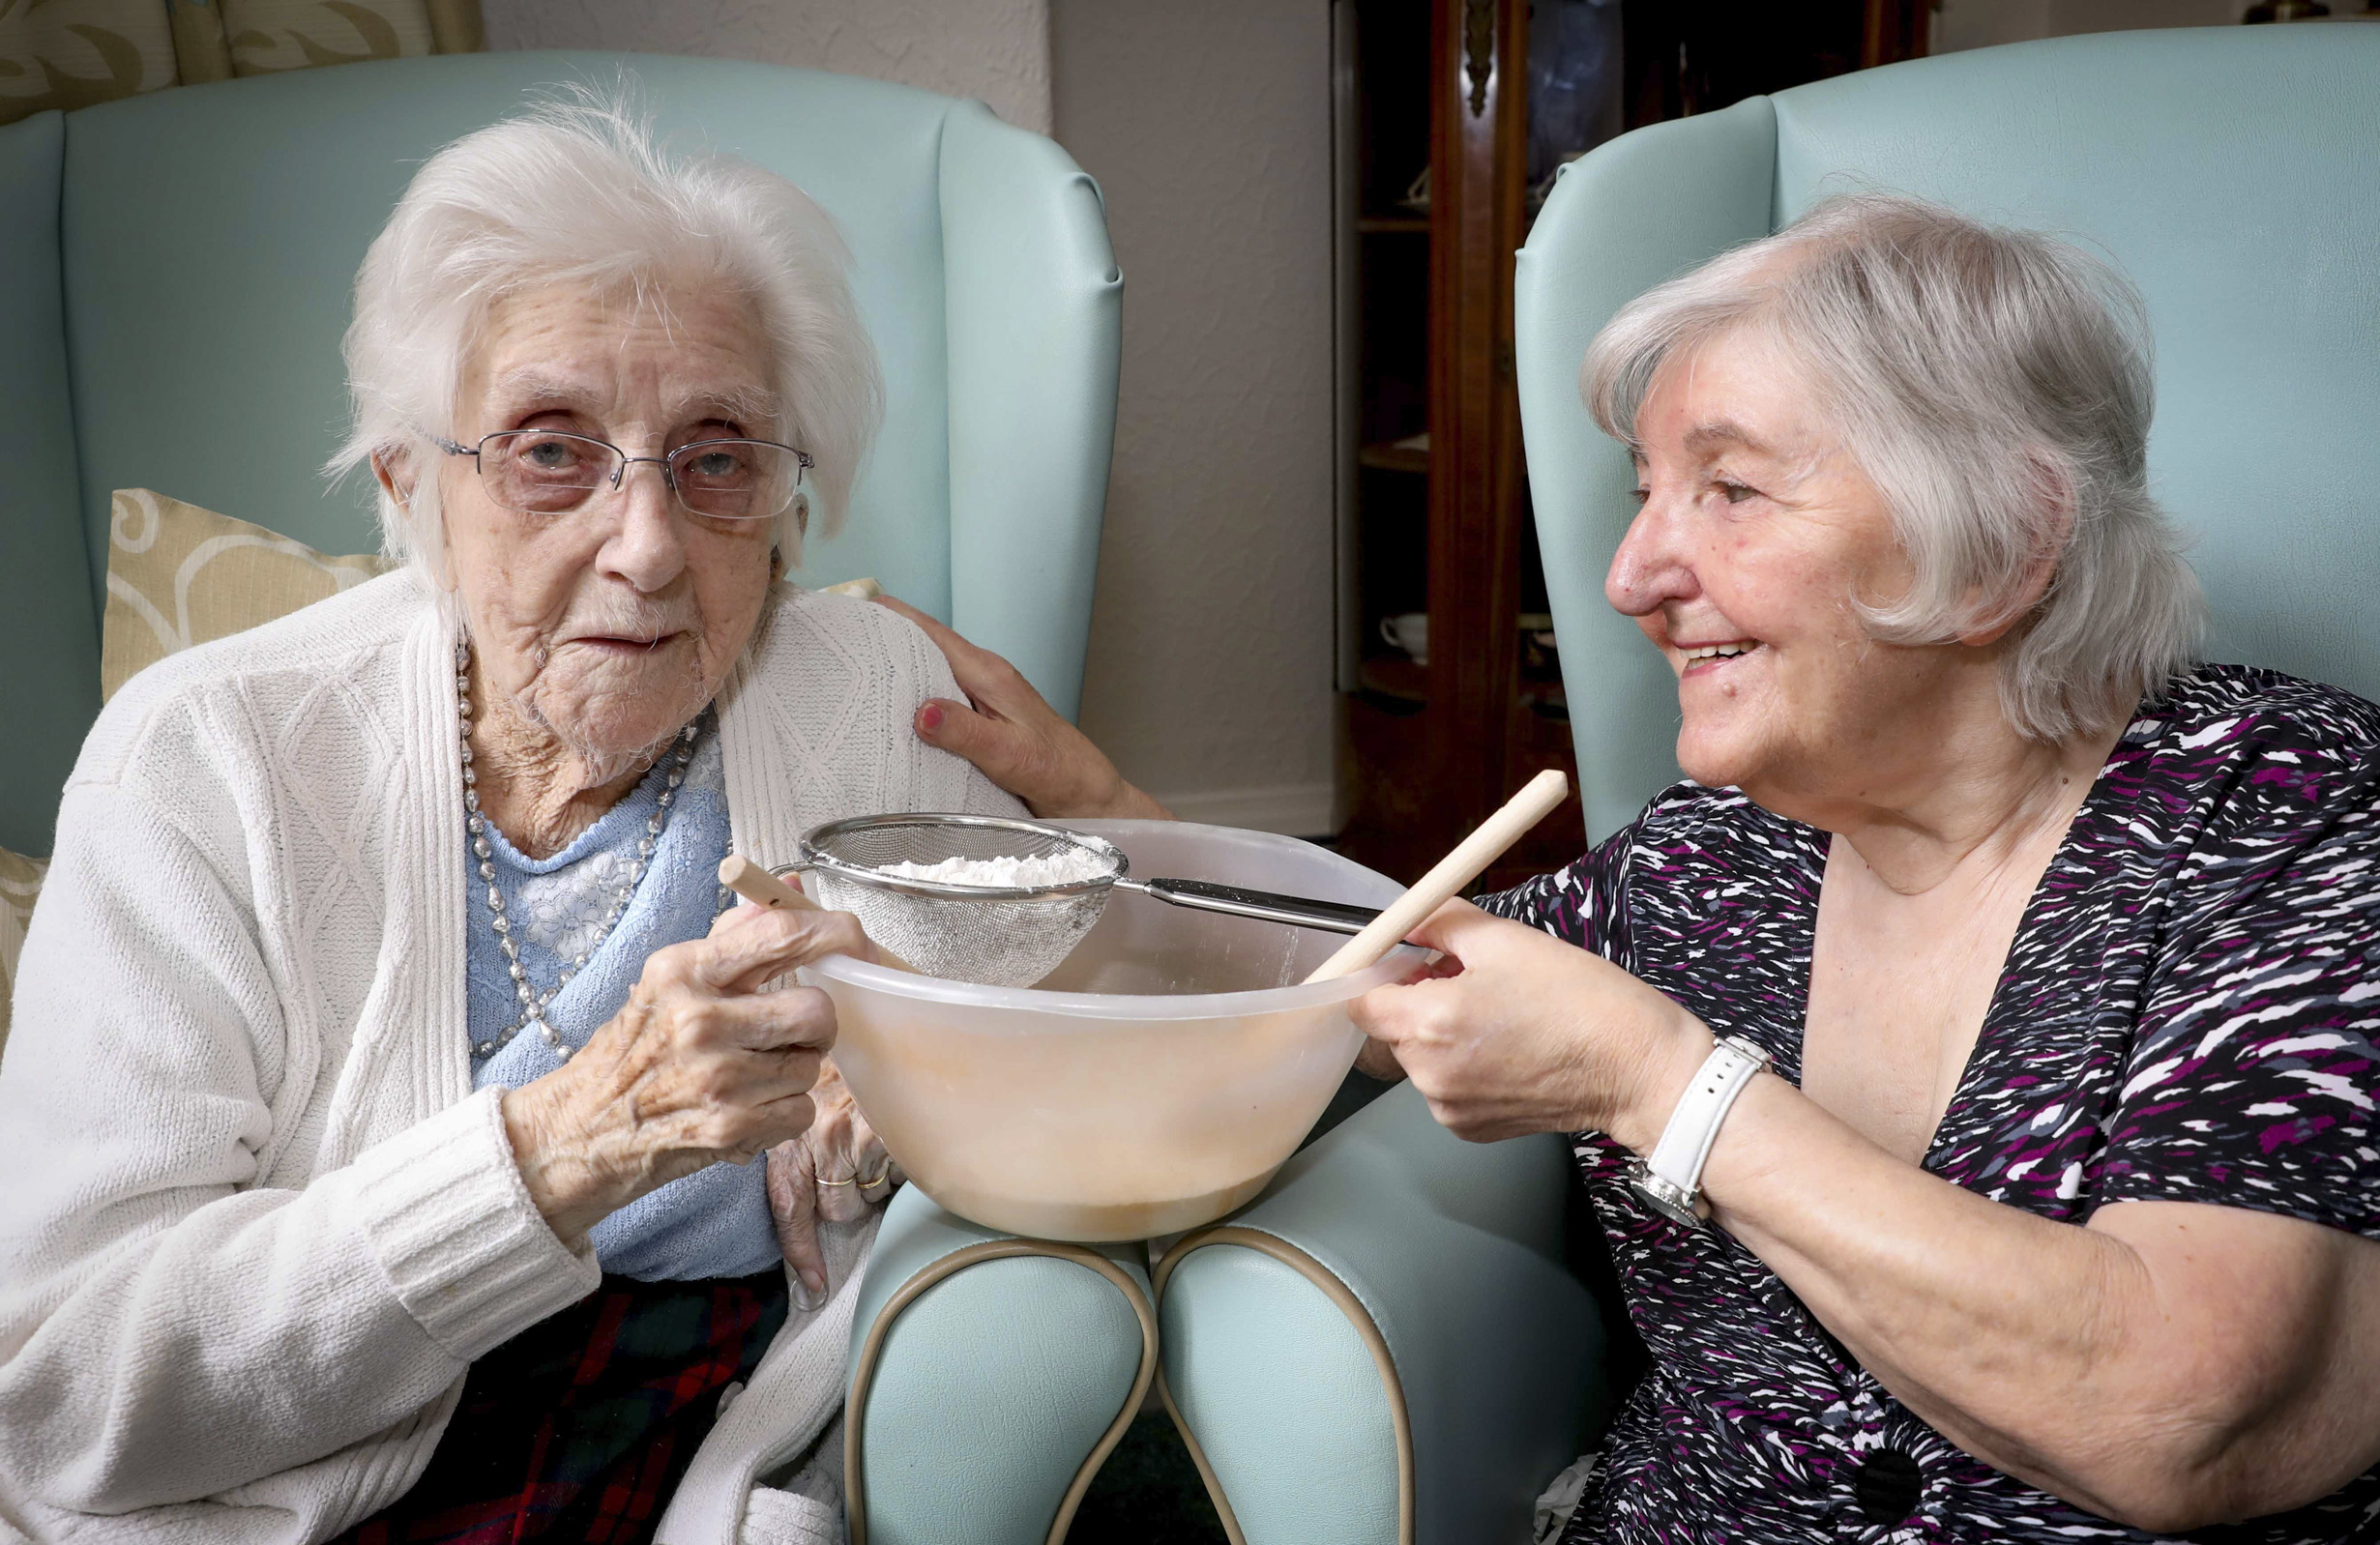 “Formidable” ex-teacher Rhiannon, 104, reunited with pupil in care home